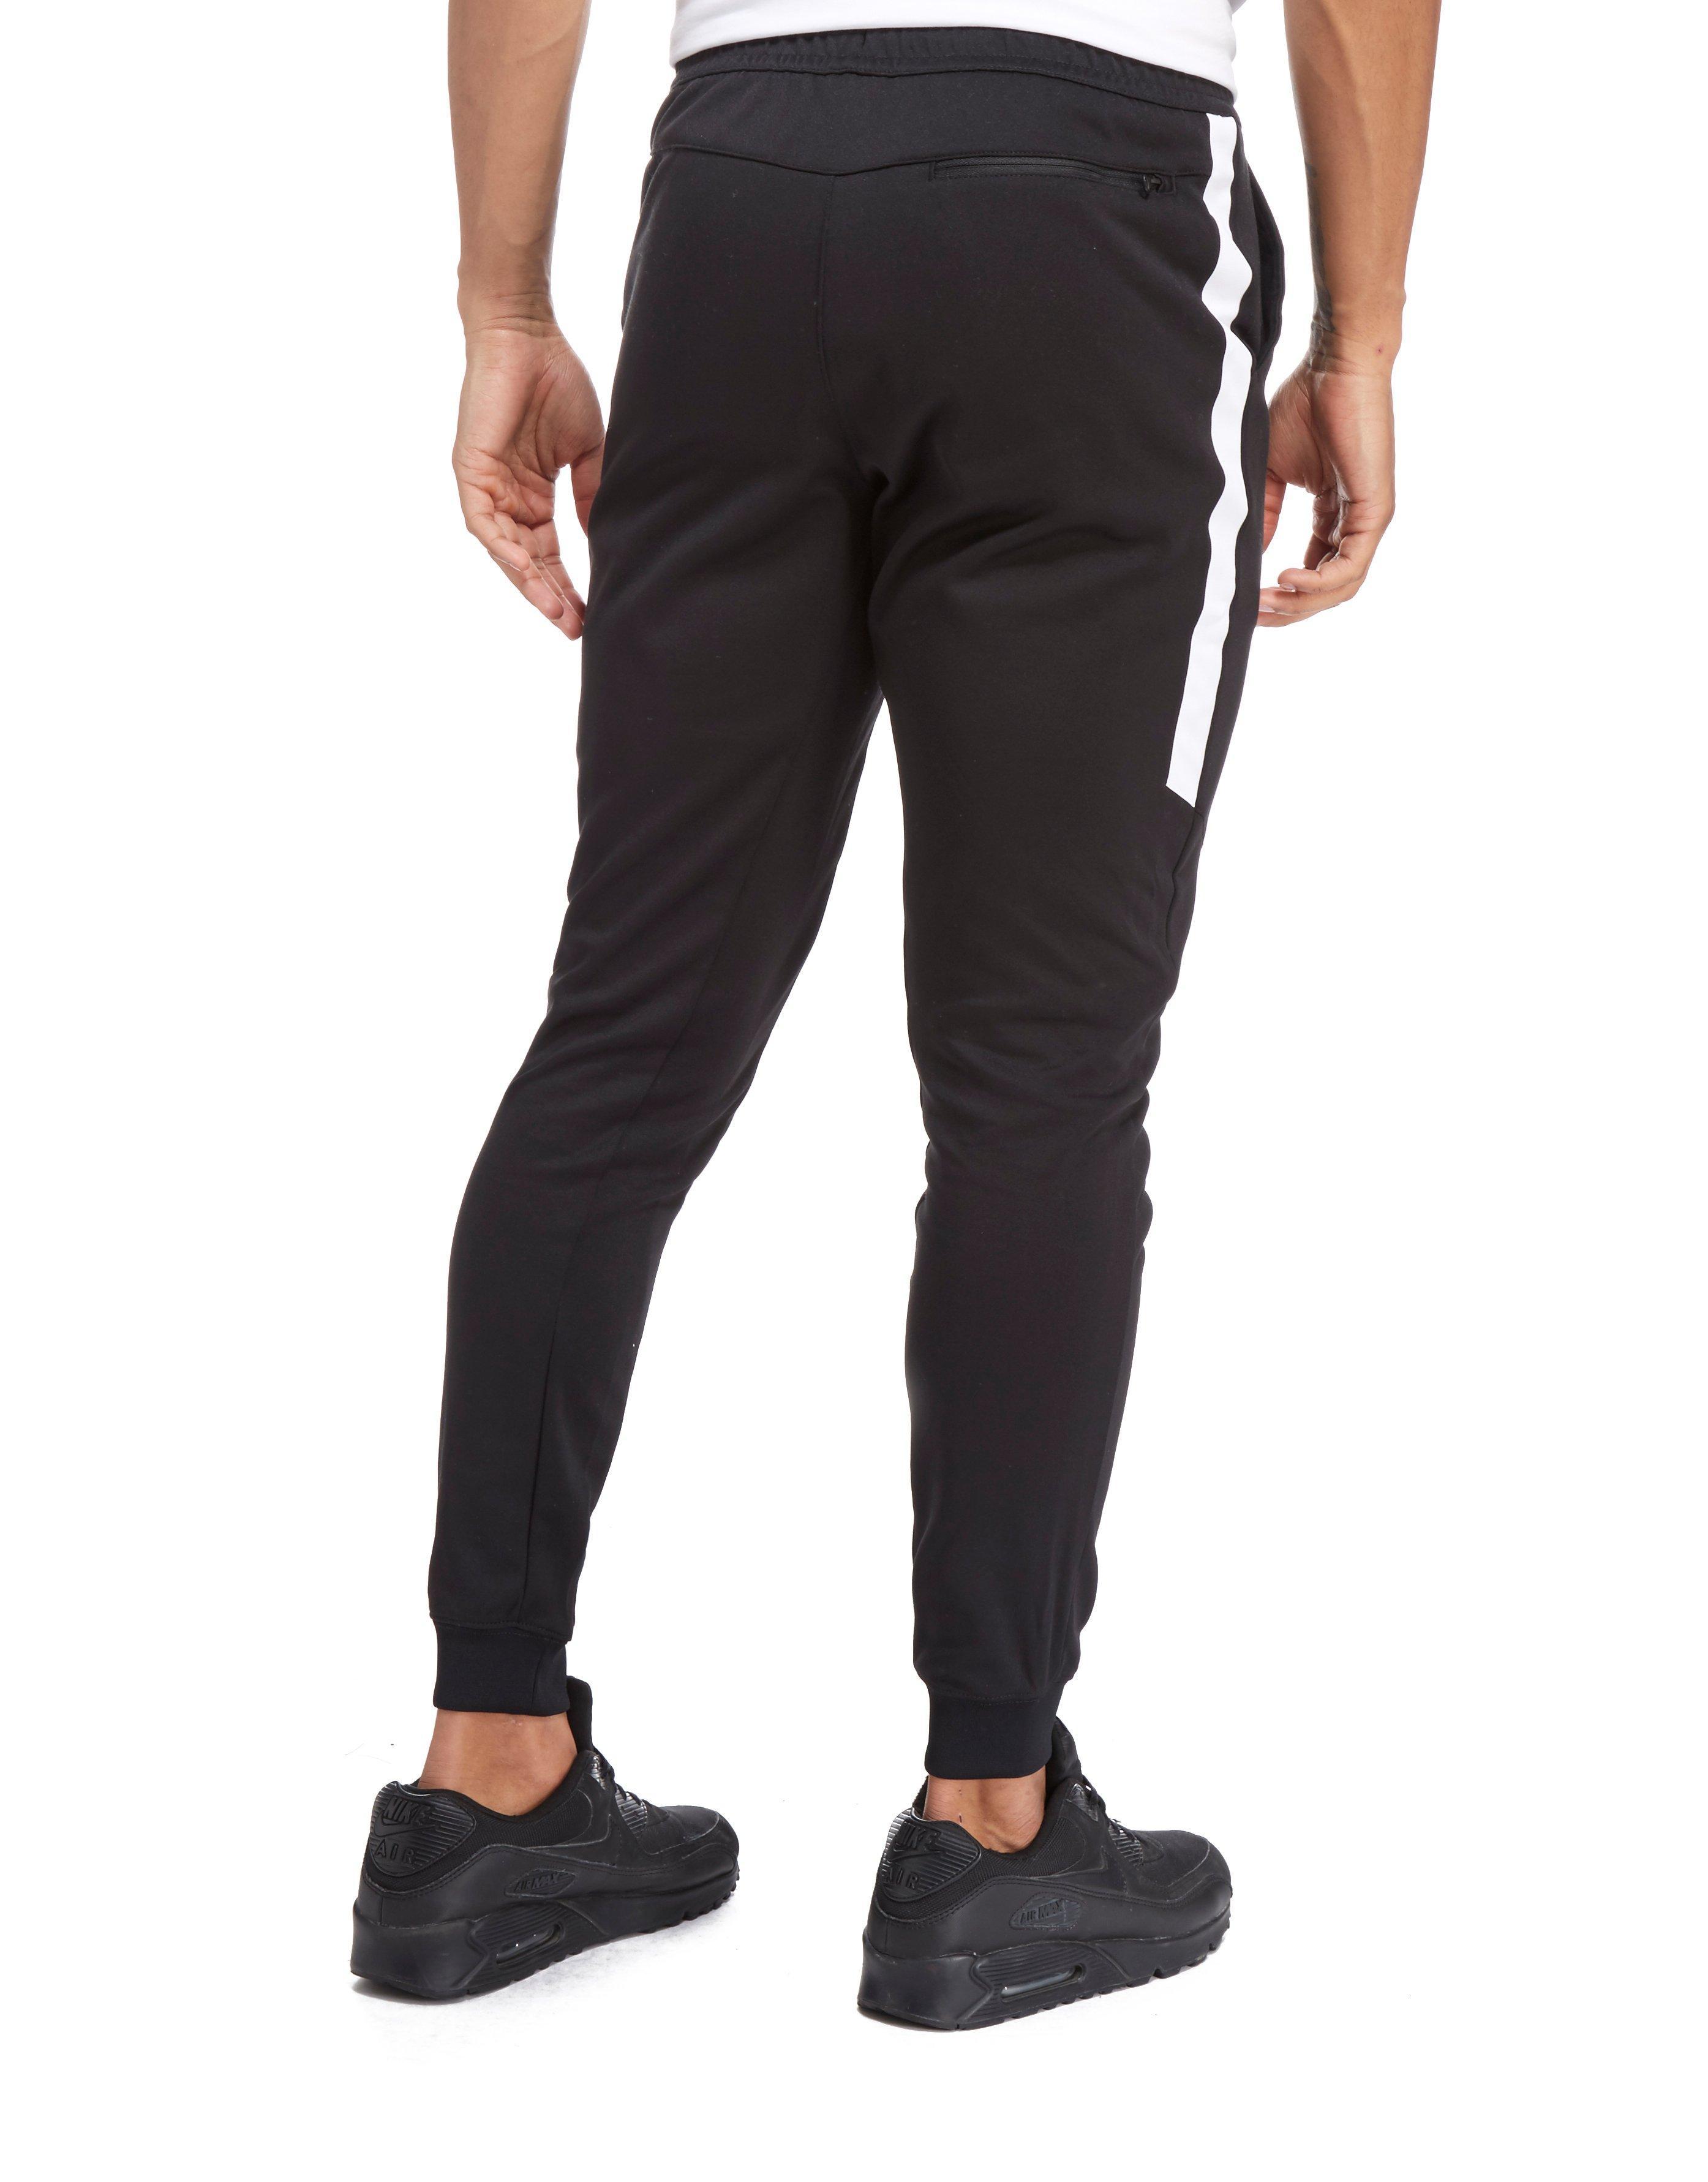 Nike Synthetic Tribute Dc Pants in Black for Men - Lyst